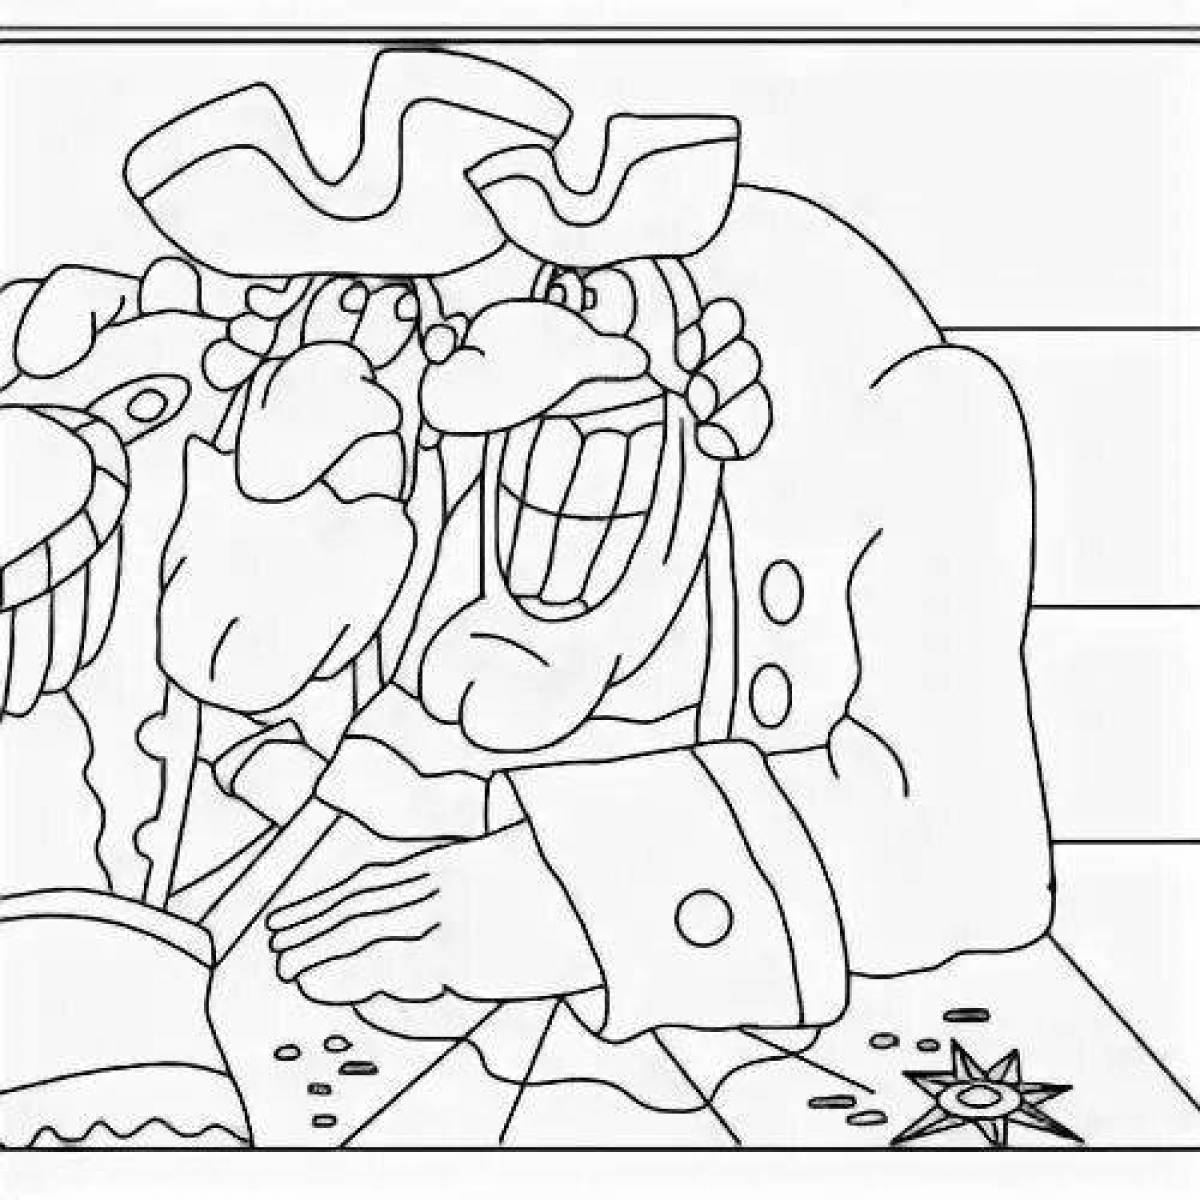 Dr Lipsy's fat coloring book